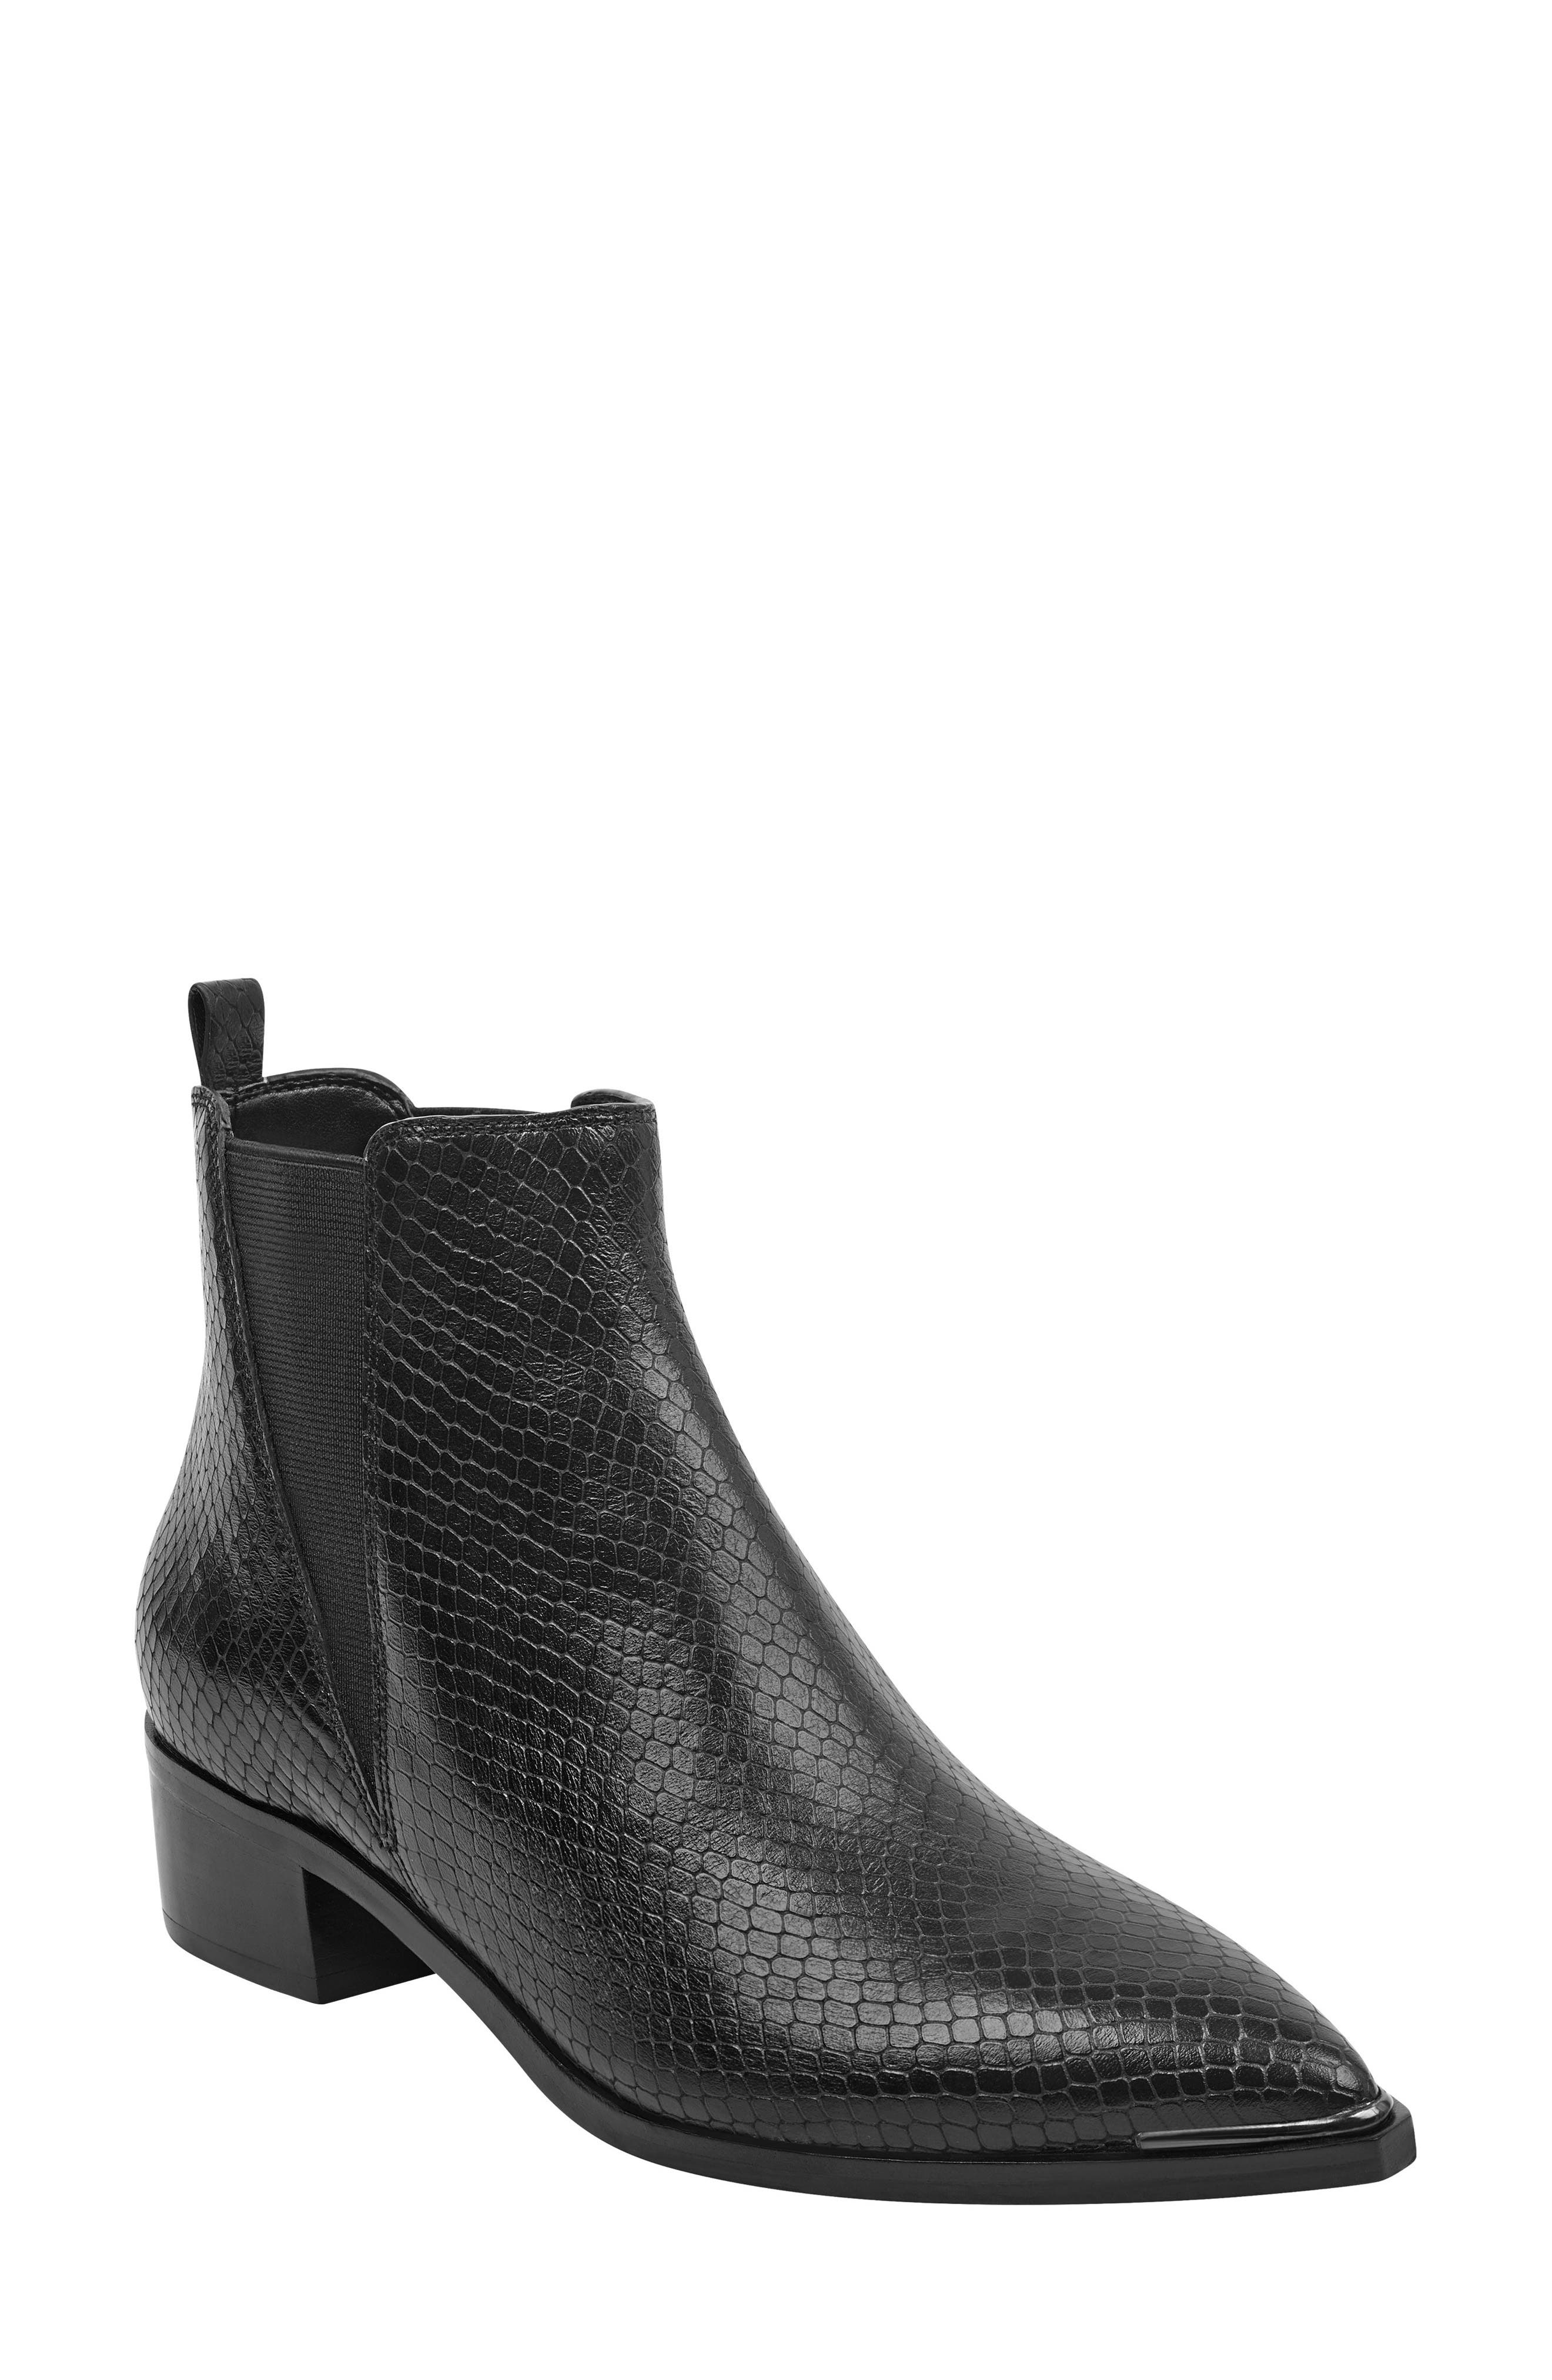 marc fisher ltd yale leather booties